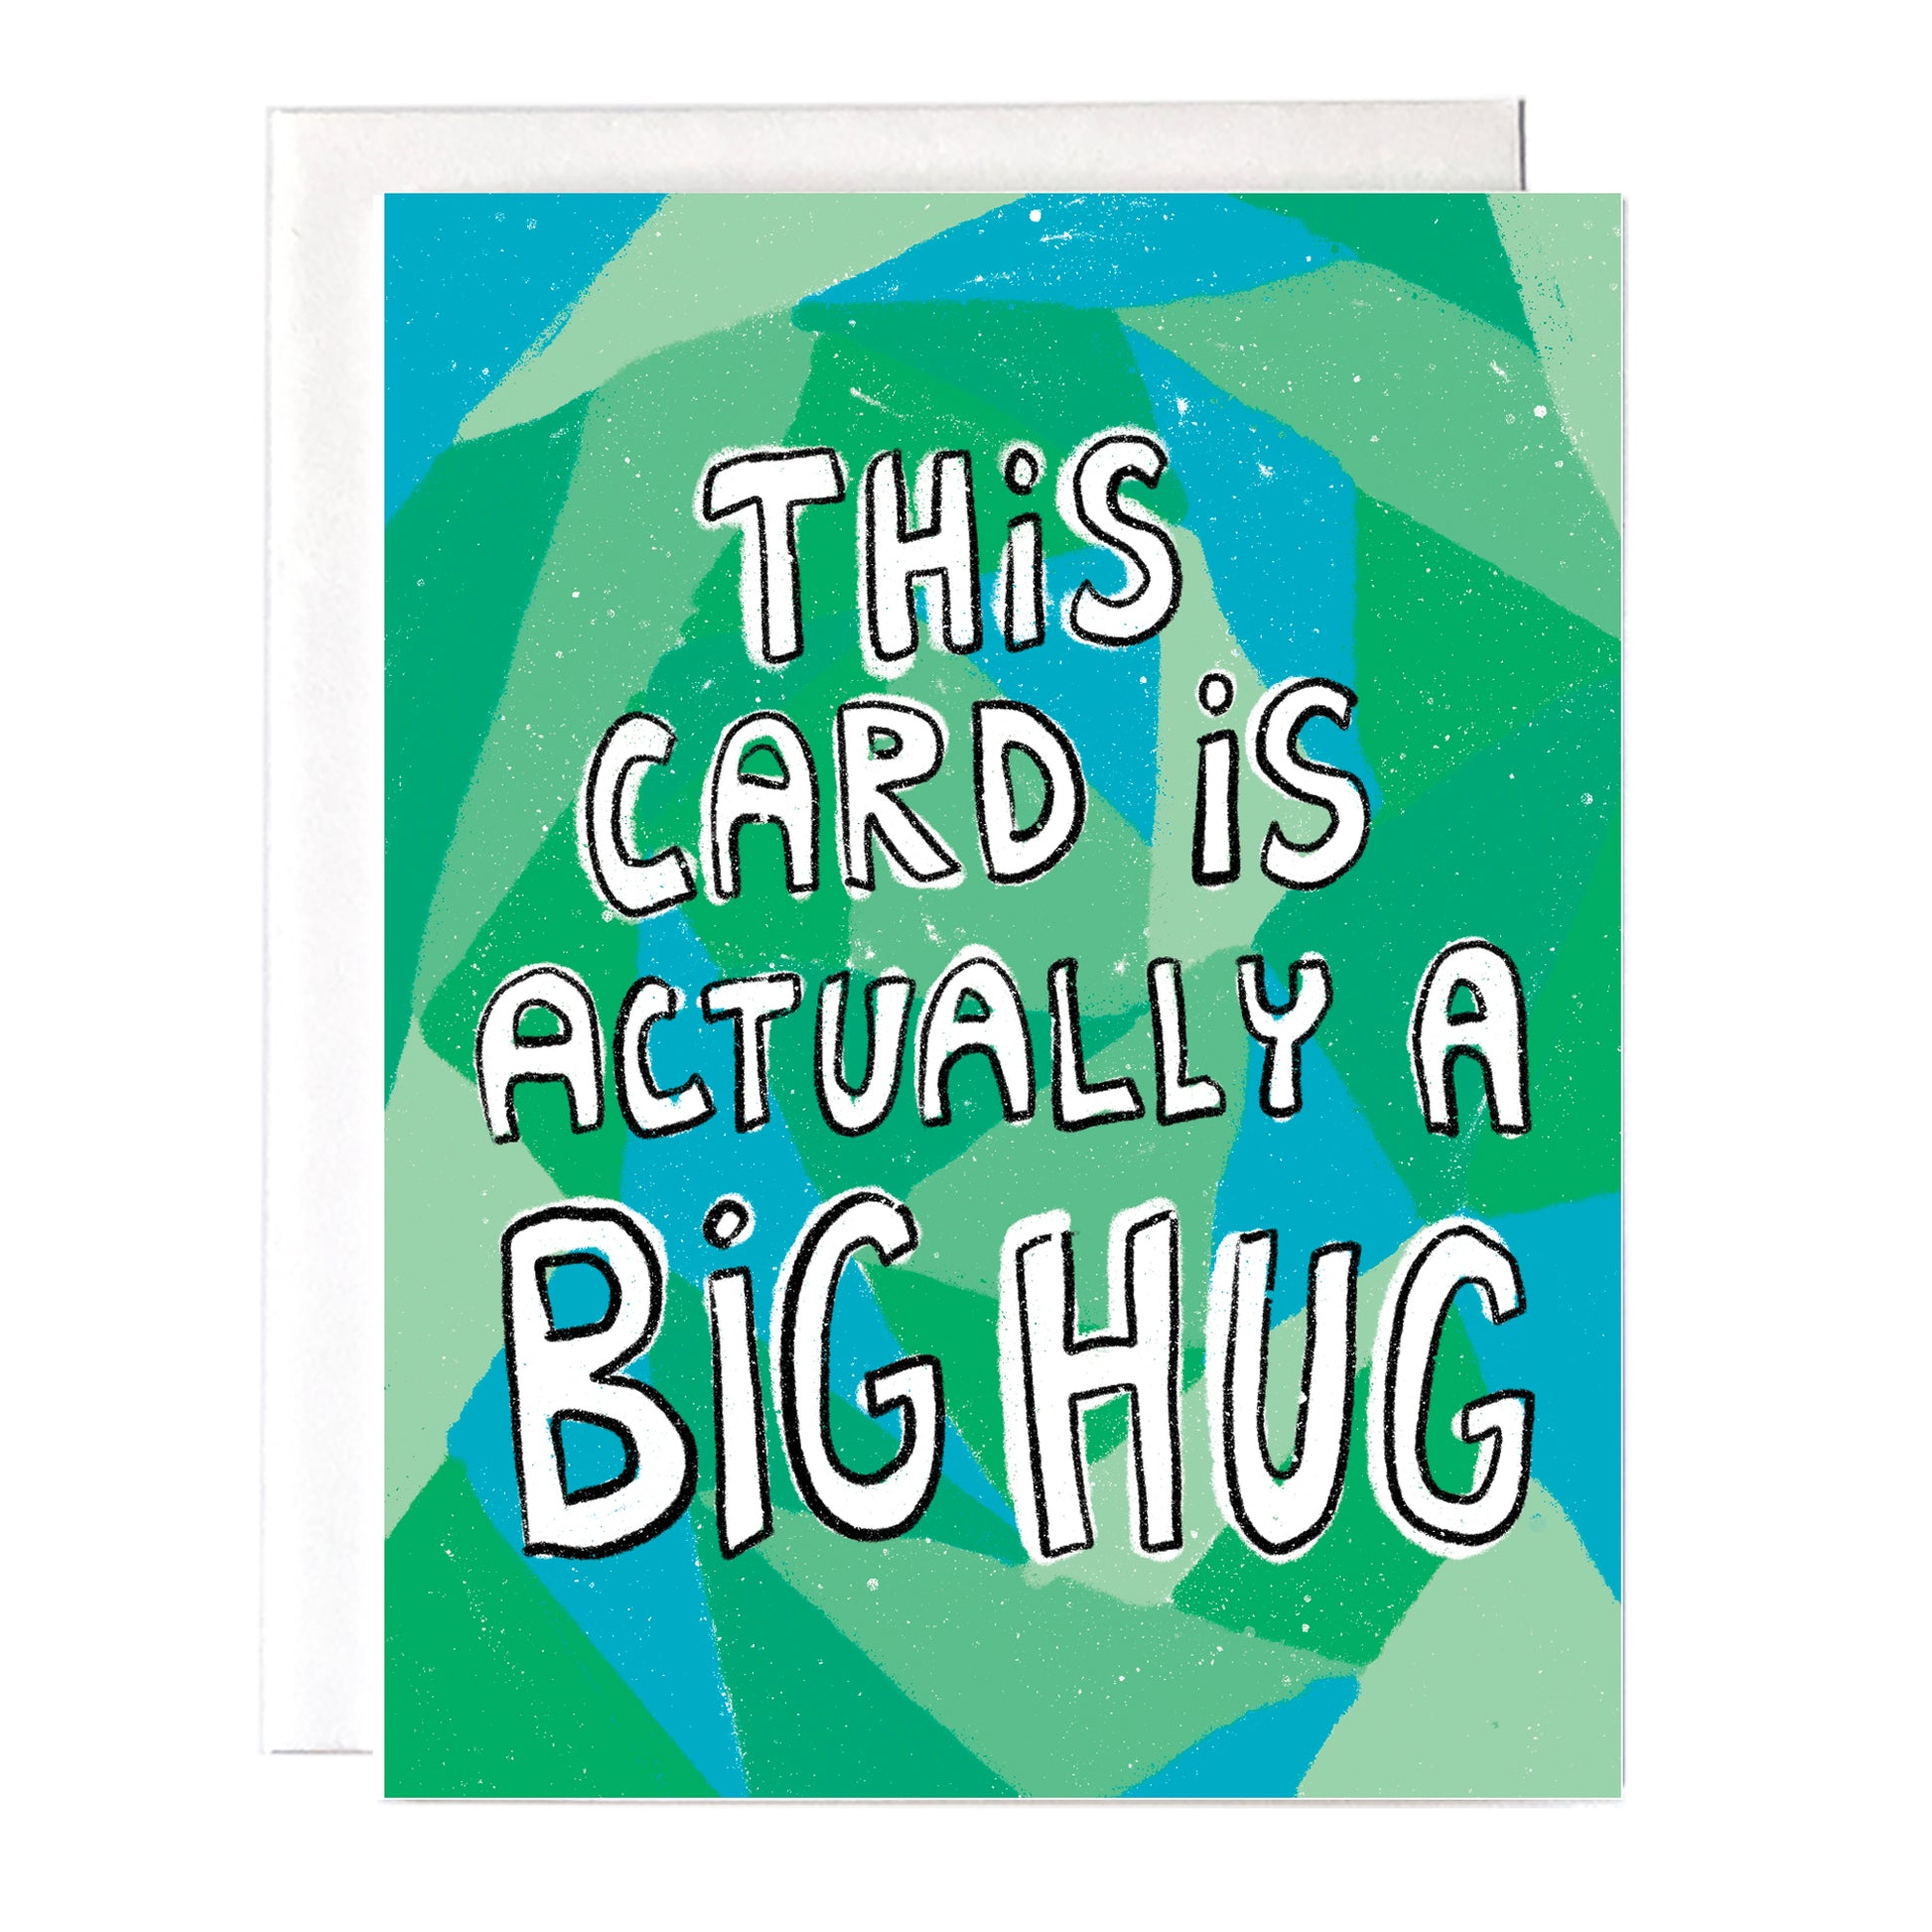 This greeting card is a way to send someone a hug through the mail. The card reads "this card is actually a big hug"